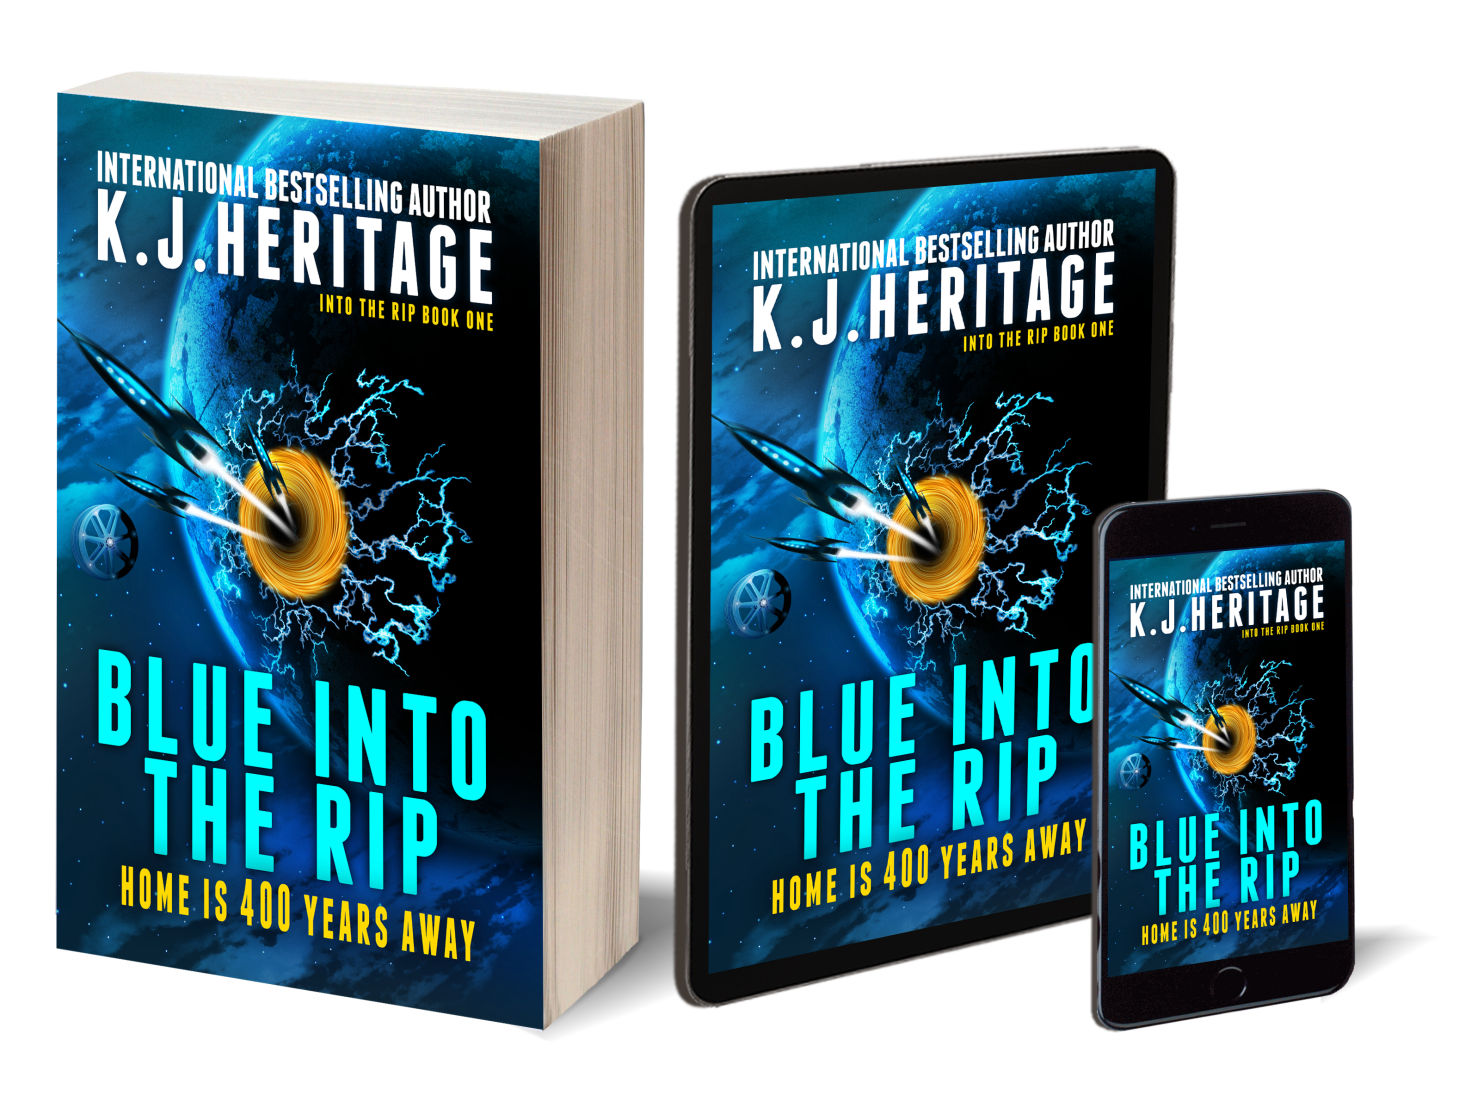 Blue Into The Rip by K.J.Heritage